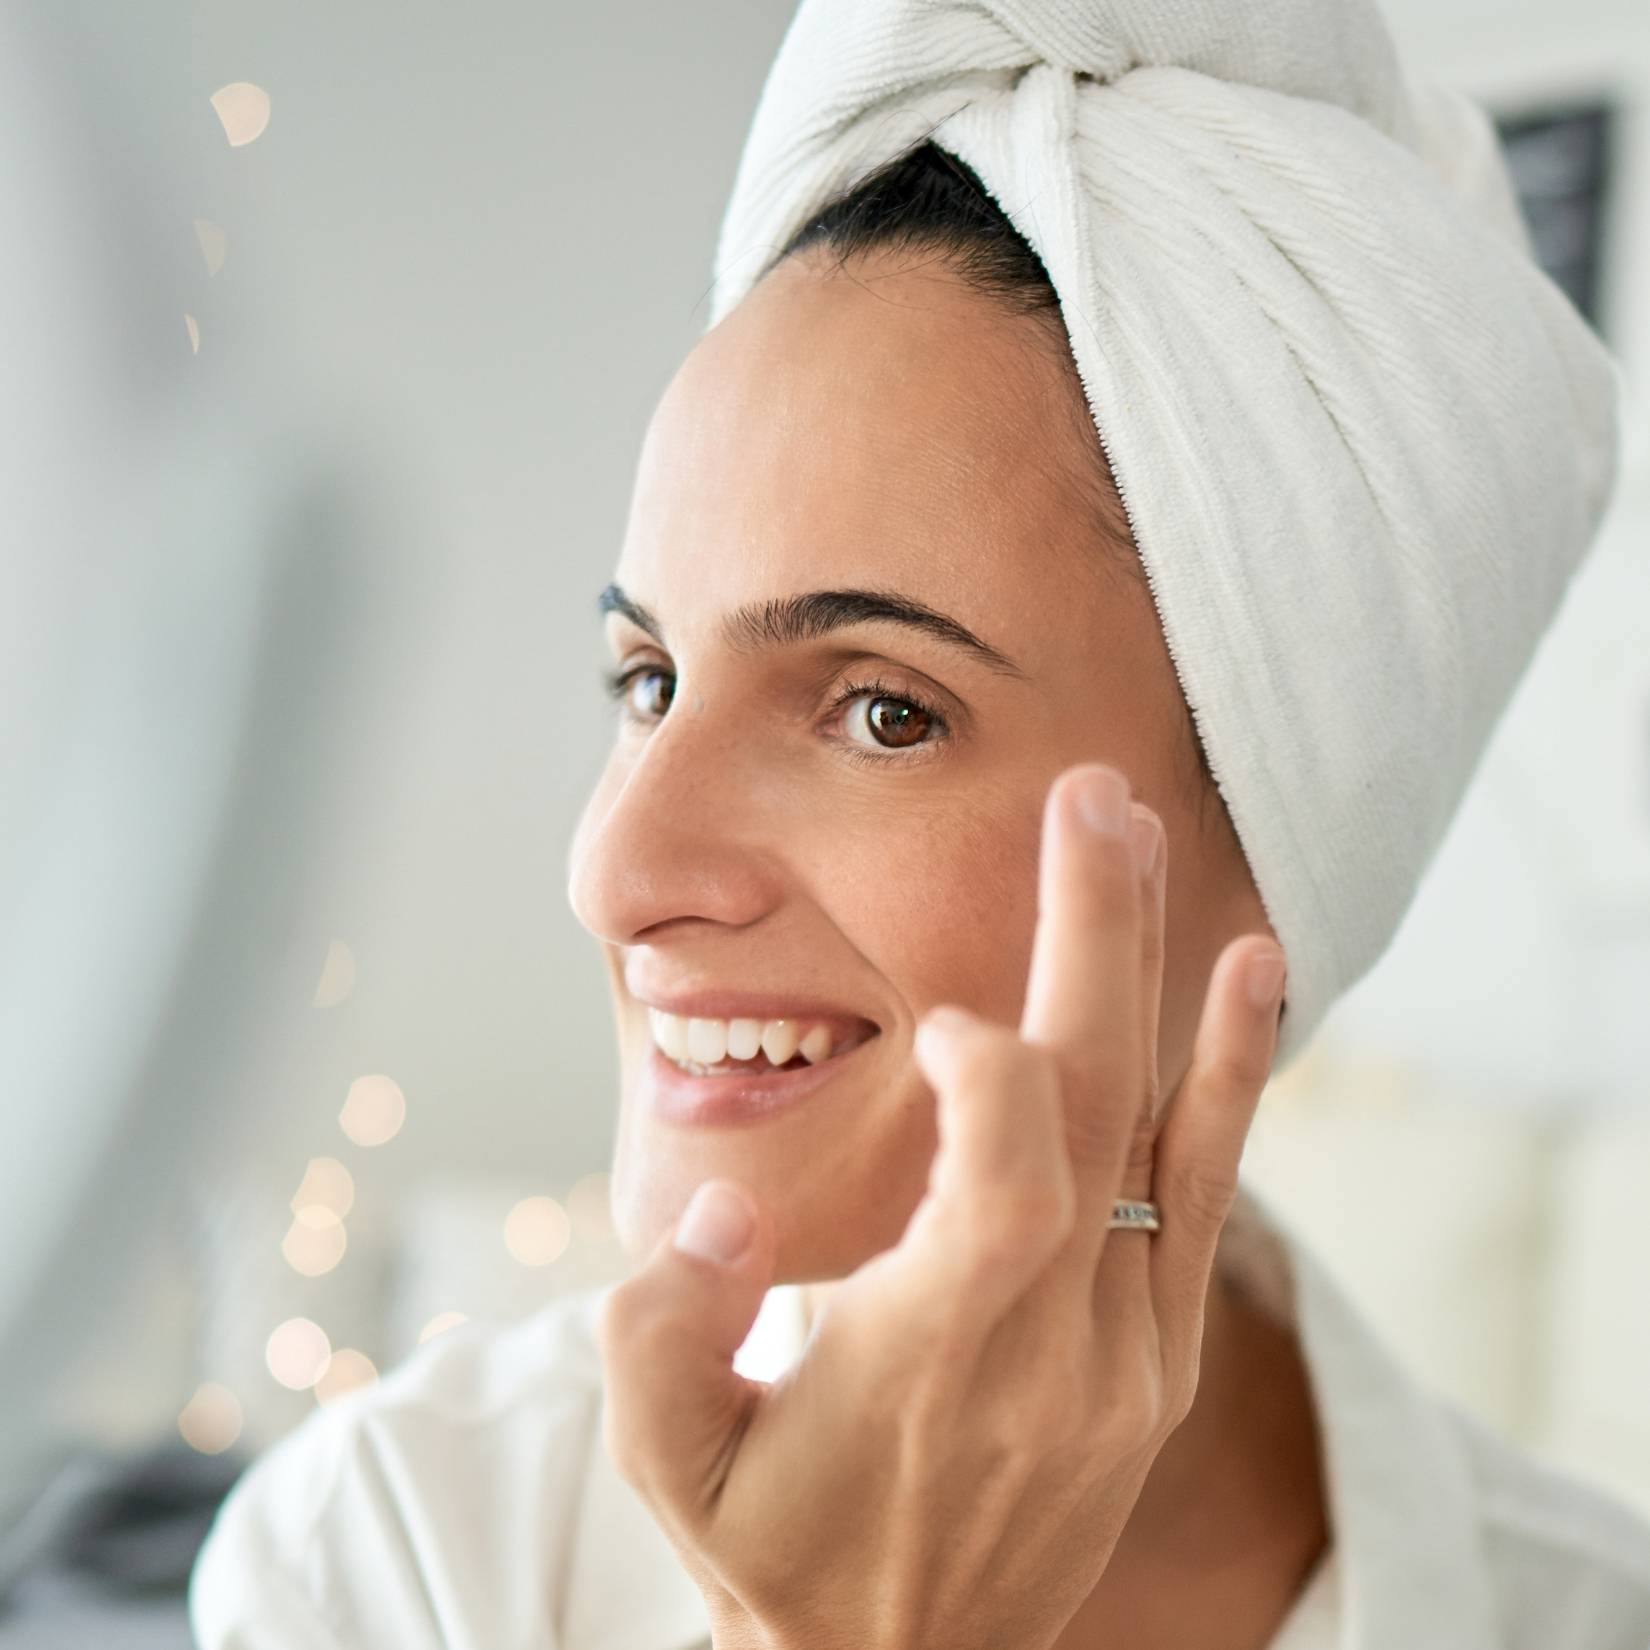 Woman applying skincare to face and smiling